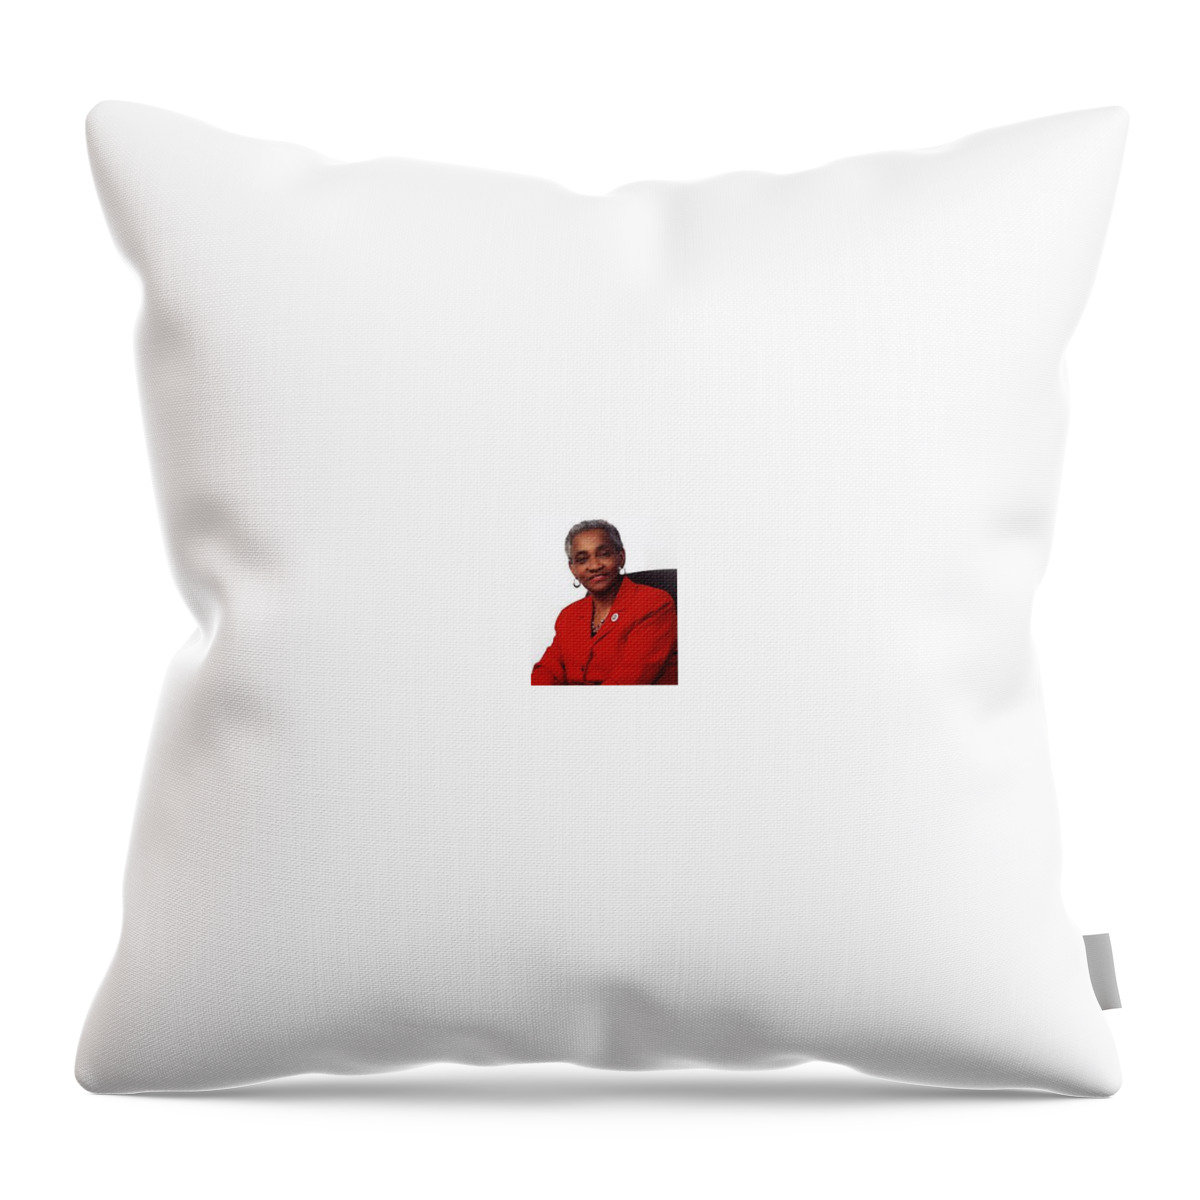  Throw Pillow featuring the photograph Community Leader Una Clarke by Trevor A Smith